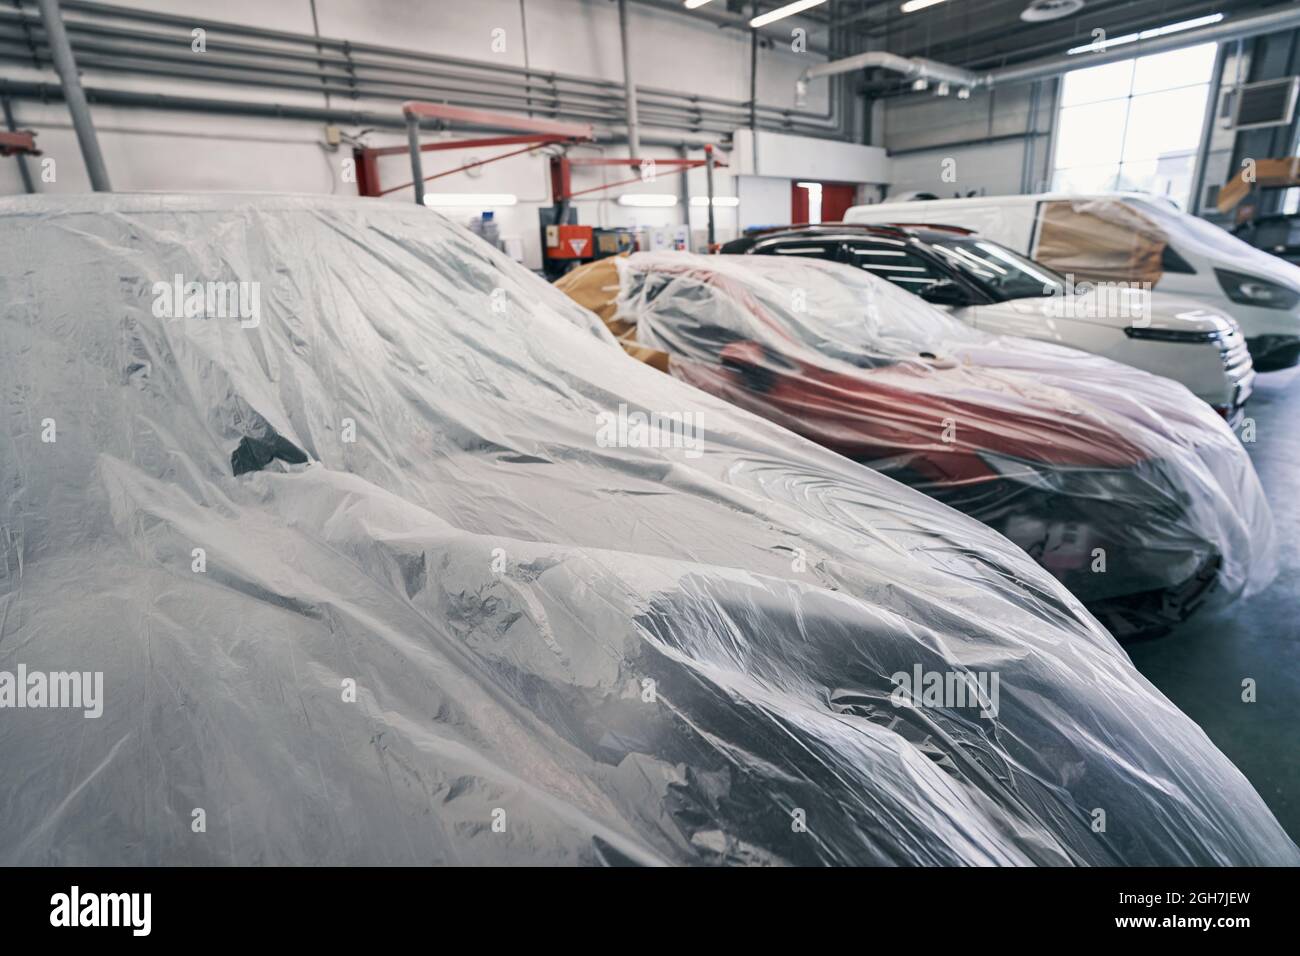 Cars standing in line with dustsheets on them Stock Photo